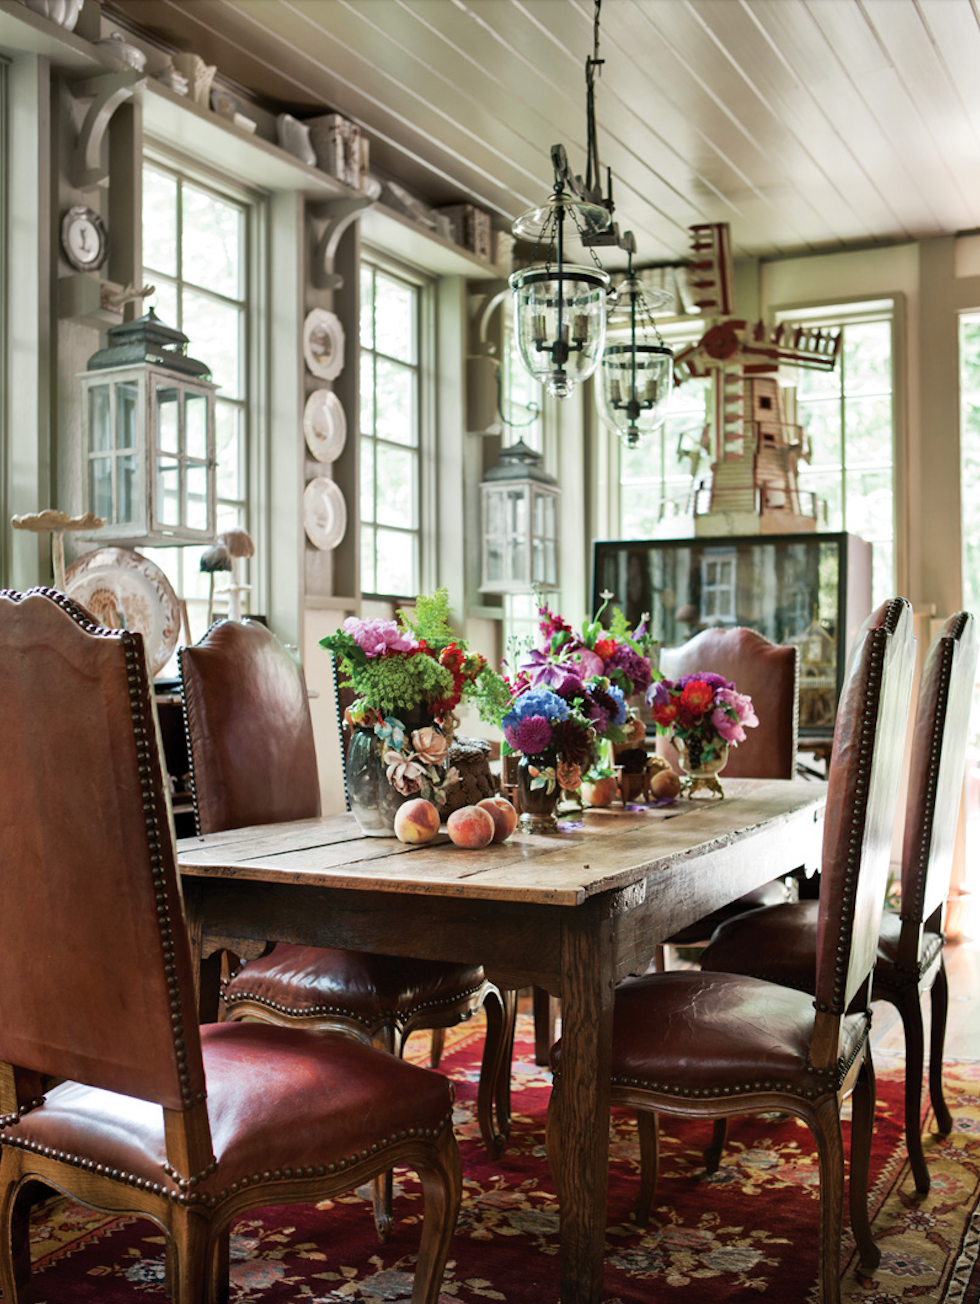 A Dutch windmill and a Turkish flat-weave rug are among the diverse highlights of the more-is-more dining room.
